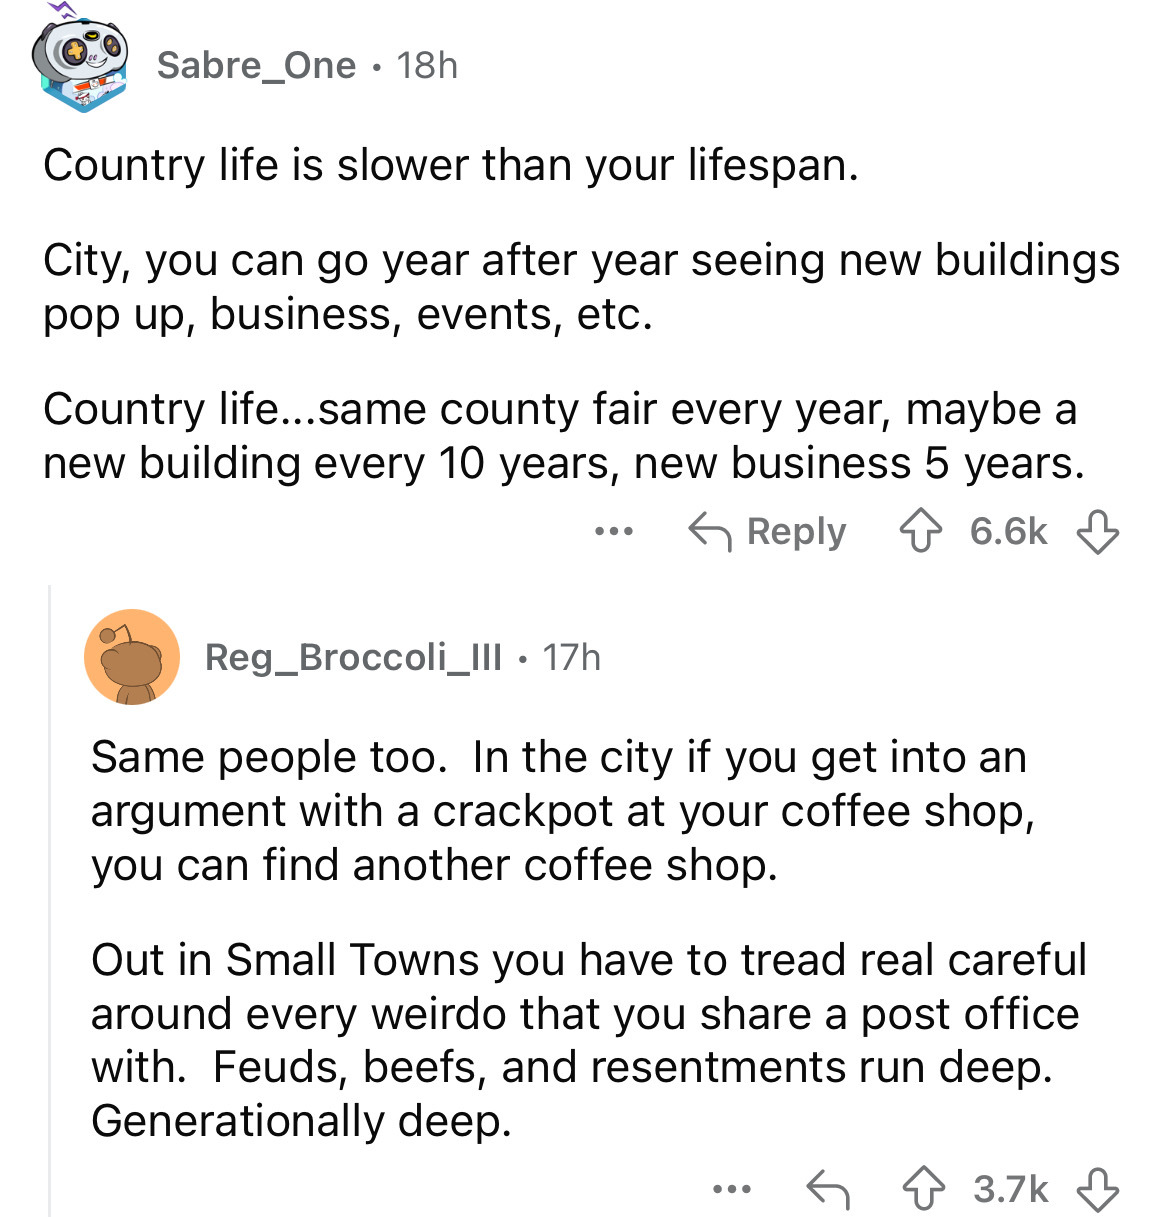 screenshot - Sabre_One 18h Country life is slower than your lifespan. City, you can go year after year seeing new buildings pop up, business, events, etc. Country life...same county fair every year, maybe a new building every 10 years, new business 5 year